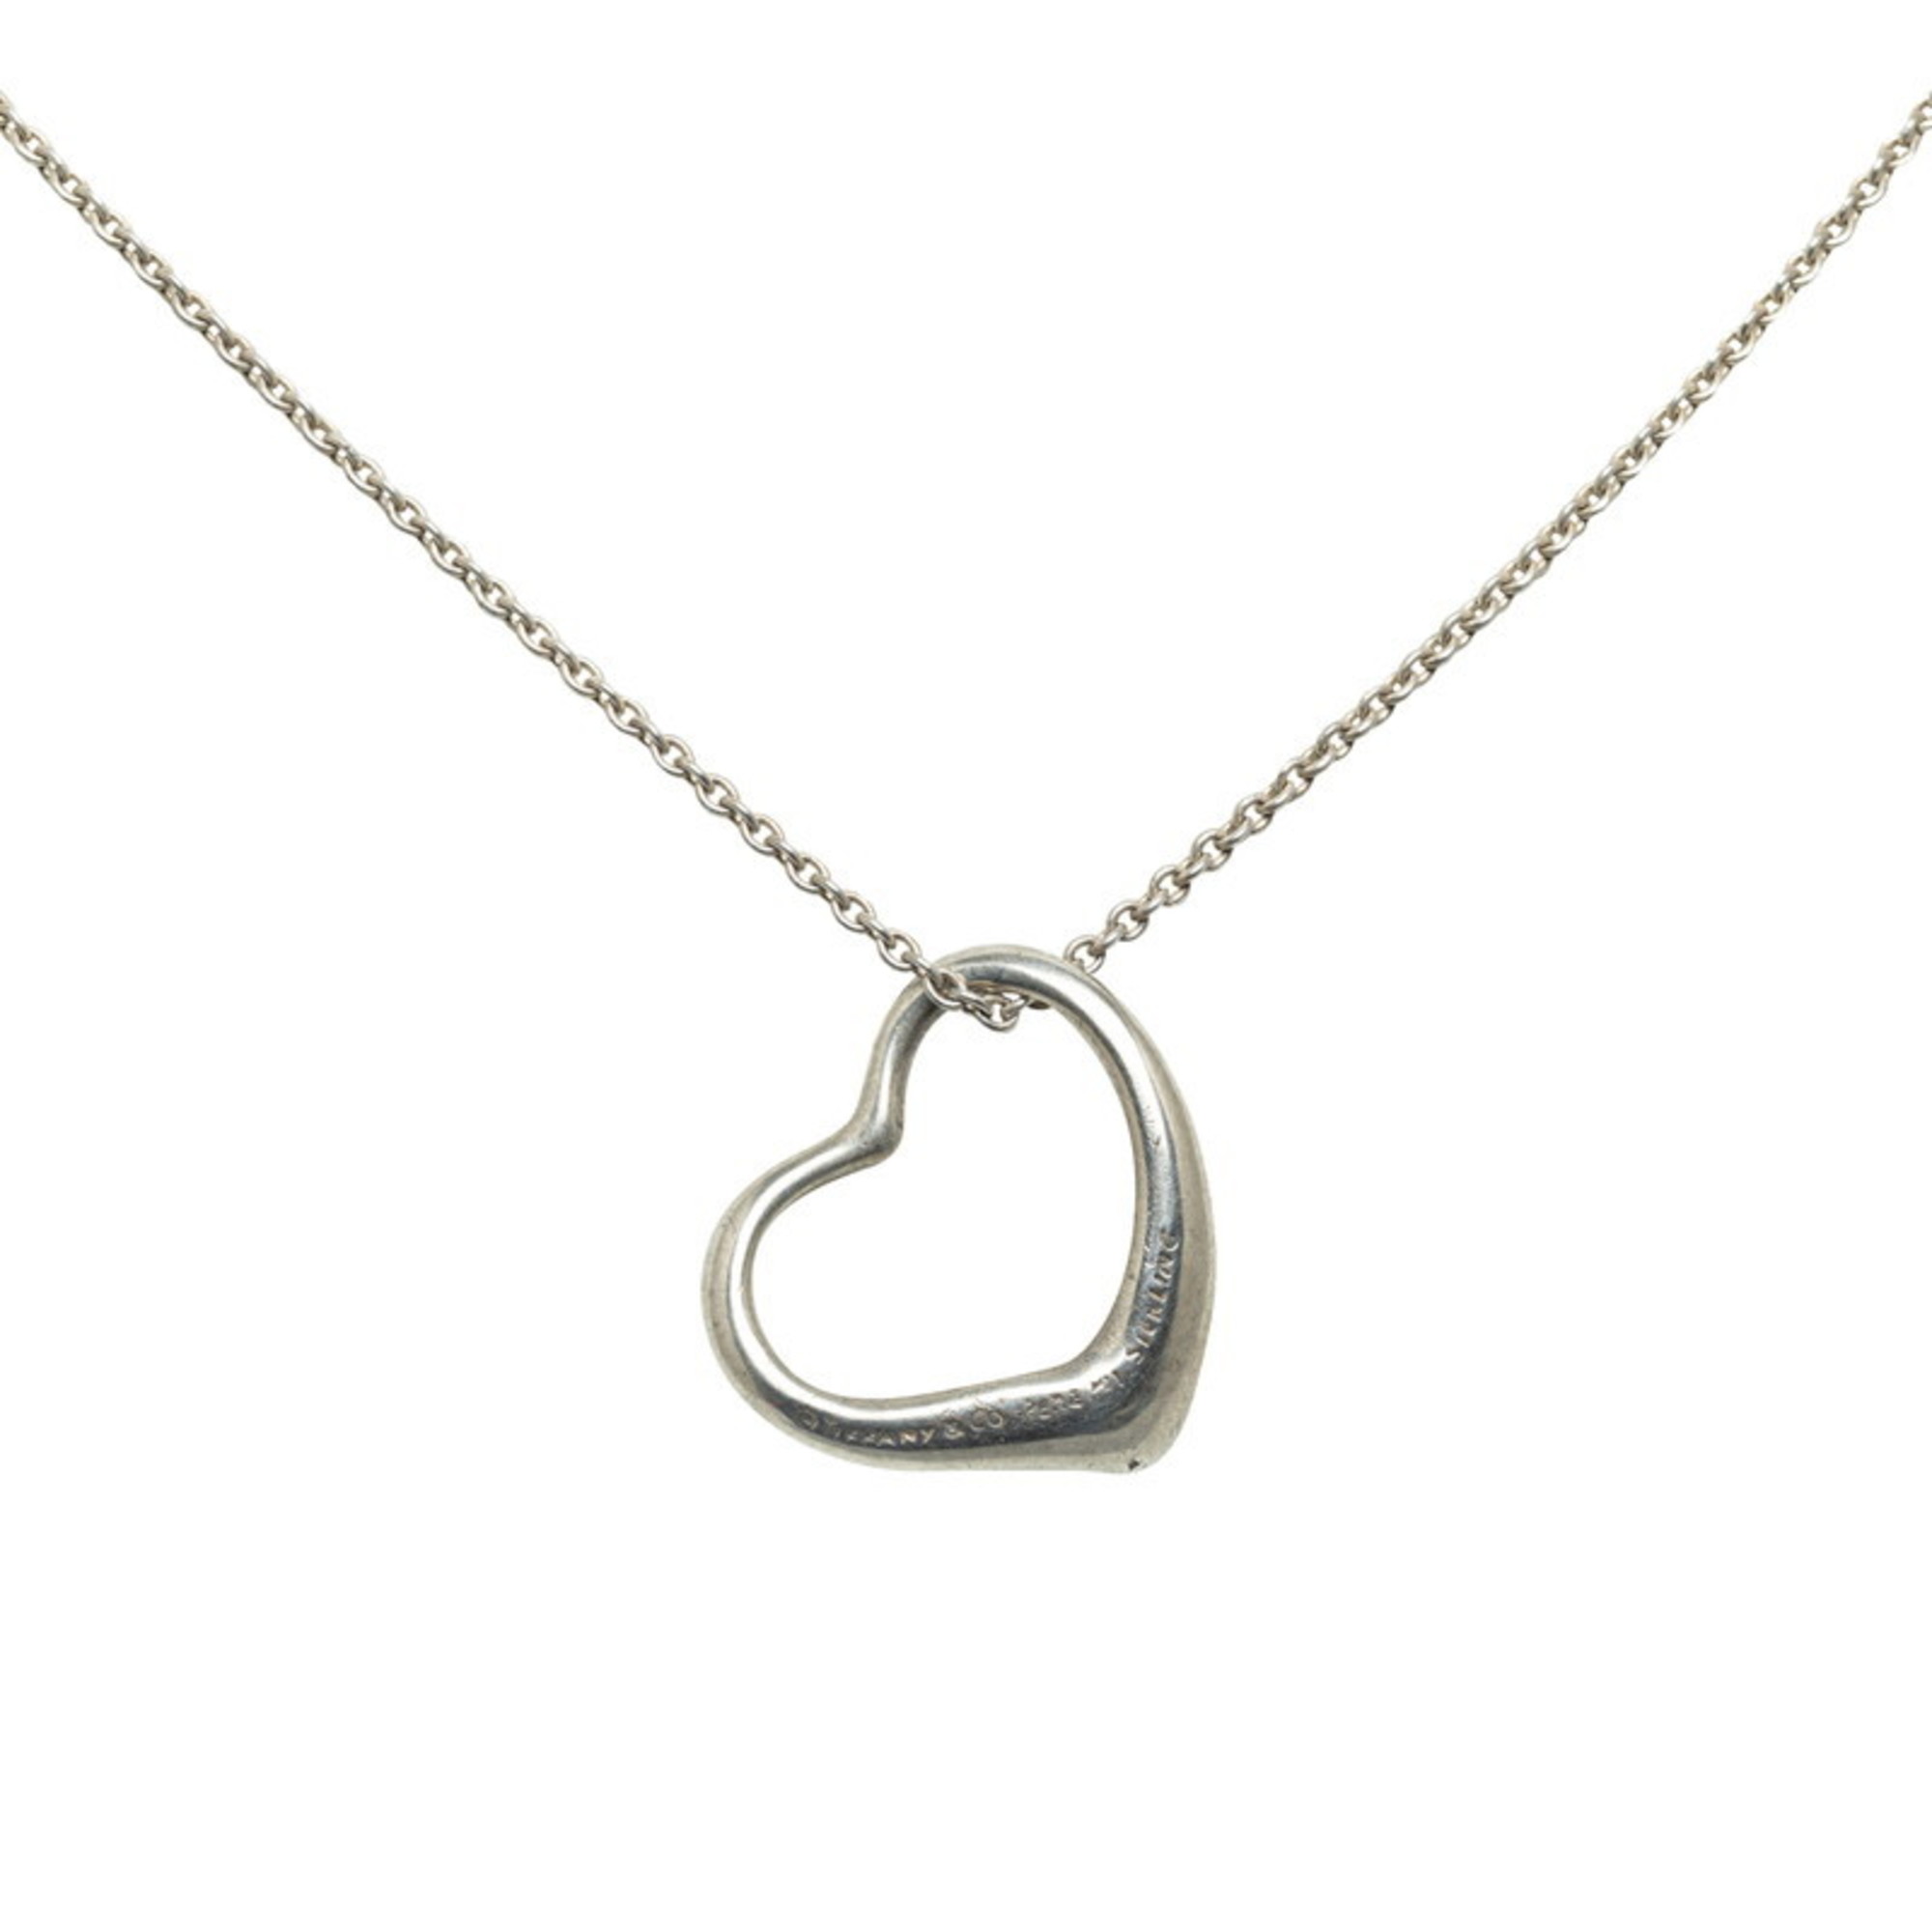 Tiffany heart necklace, sterling silver, for women, TIFFANY&Co.